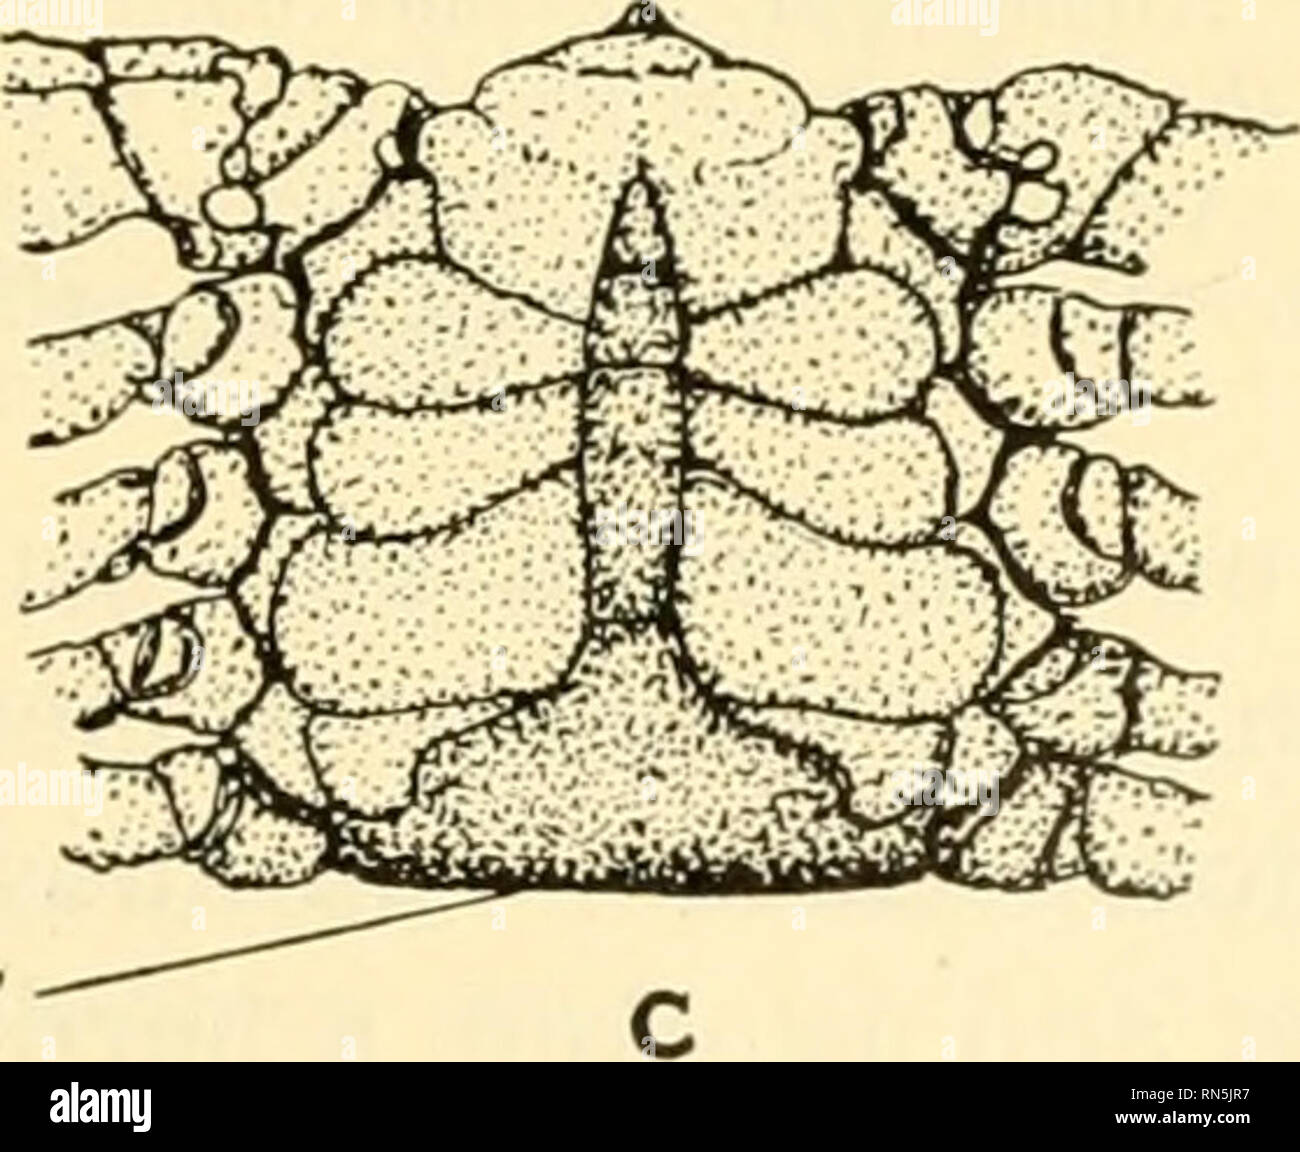 . Animal biology. Zoology; Biology. Abdomen Fig. 159.—The blue or edible crab of the Atlantic coast, Callinectes sapidus Rathbun. From preserved specimens. A, upper surface. X J^. B, under surface of female to show breadth of abdominal metameres between which and the thorax the eggs are carried. C, under surface of body of male to show the attached to the swimmerets. X yo narrowness of abdominal metameres. Xl first glance appear to be unnaturally active snails, but which on examina- tion prove to be snail shells containing young hermit crabs. Sometimes these snail shells also bear other animal Stock Photo